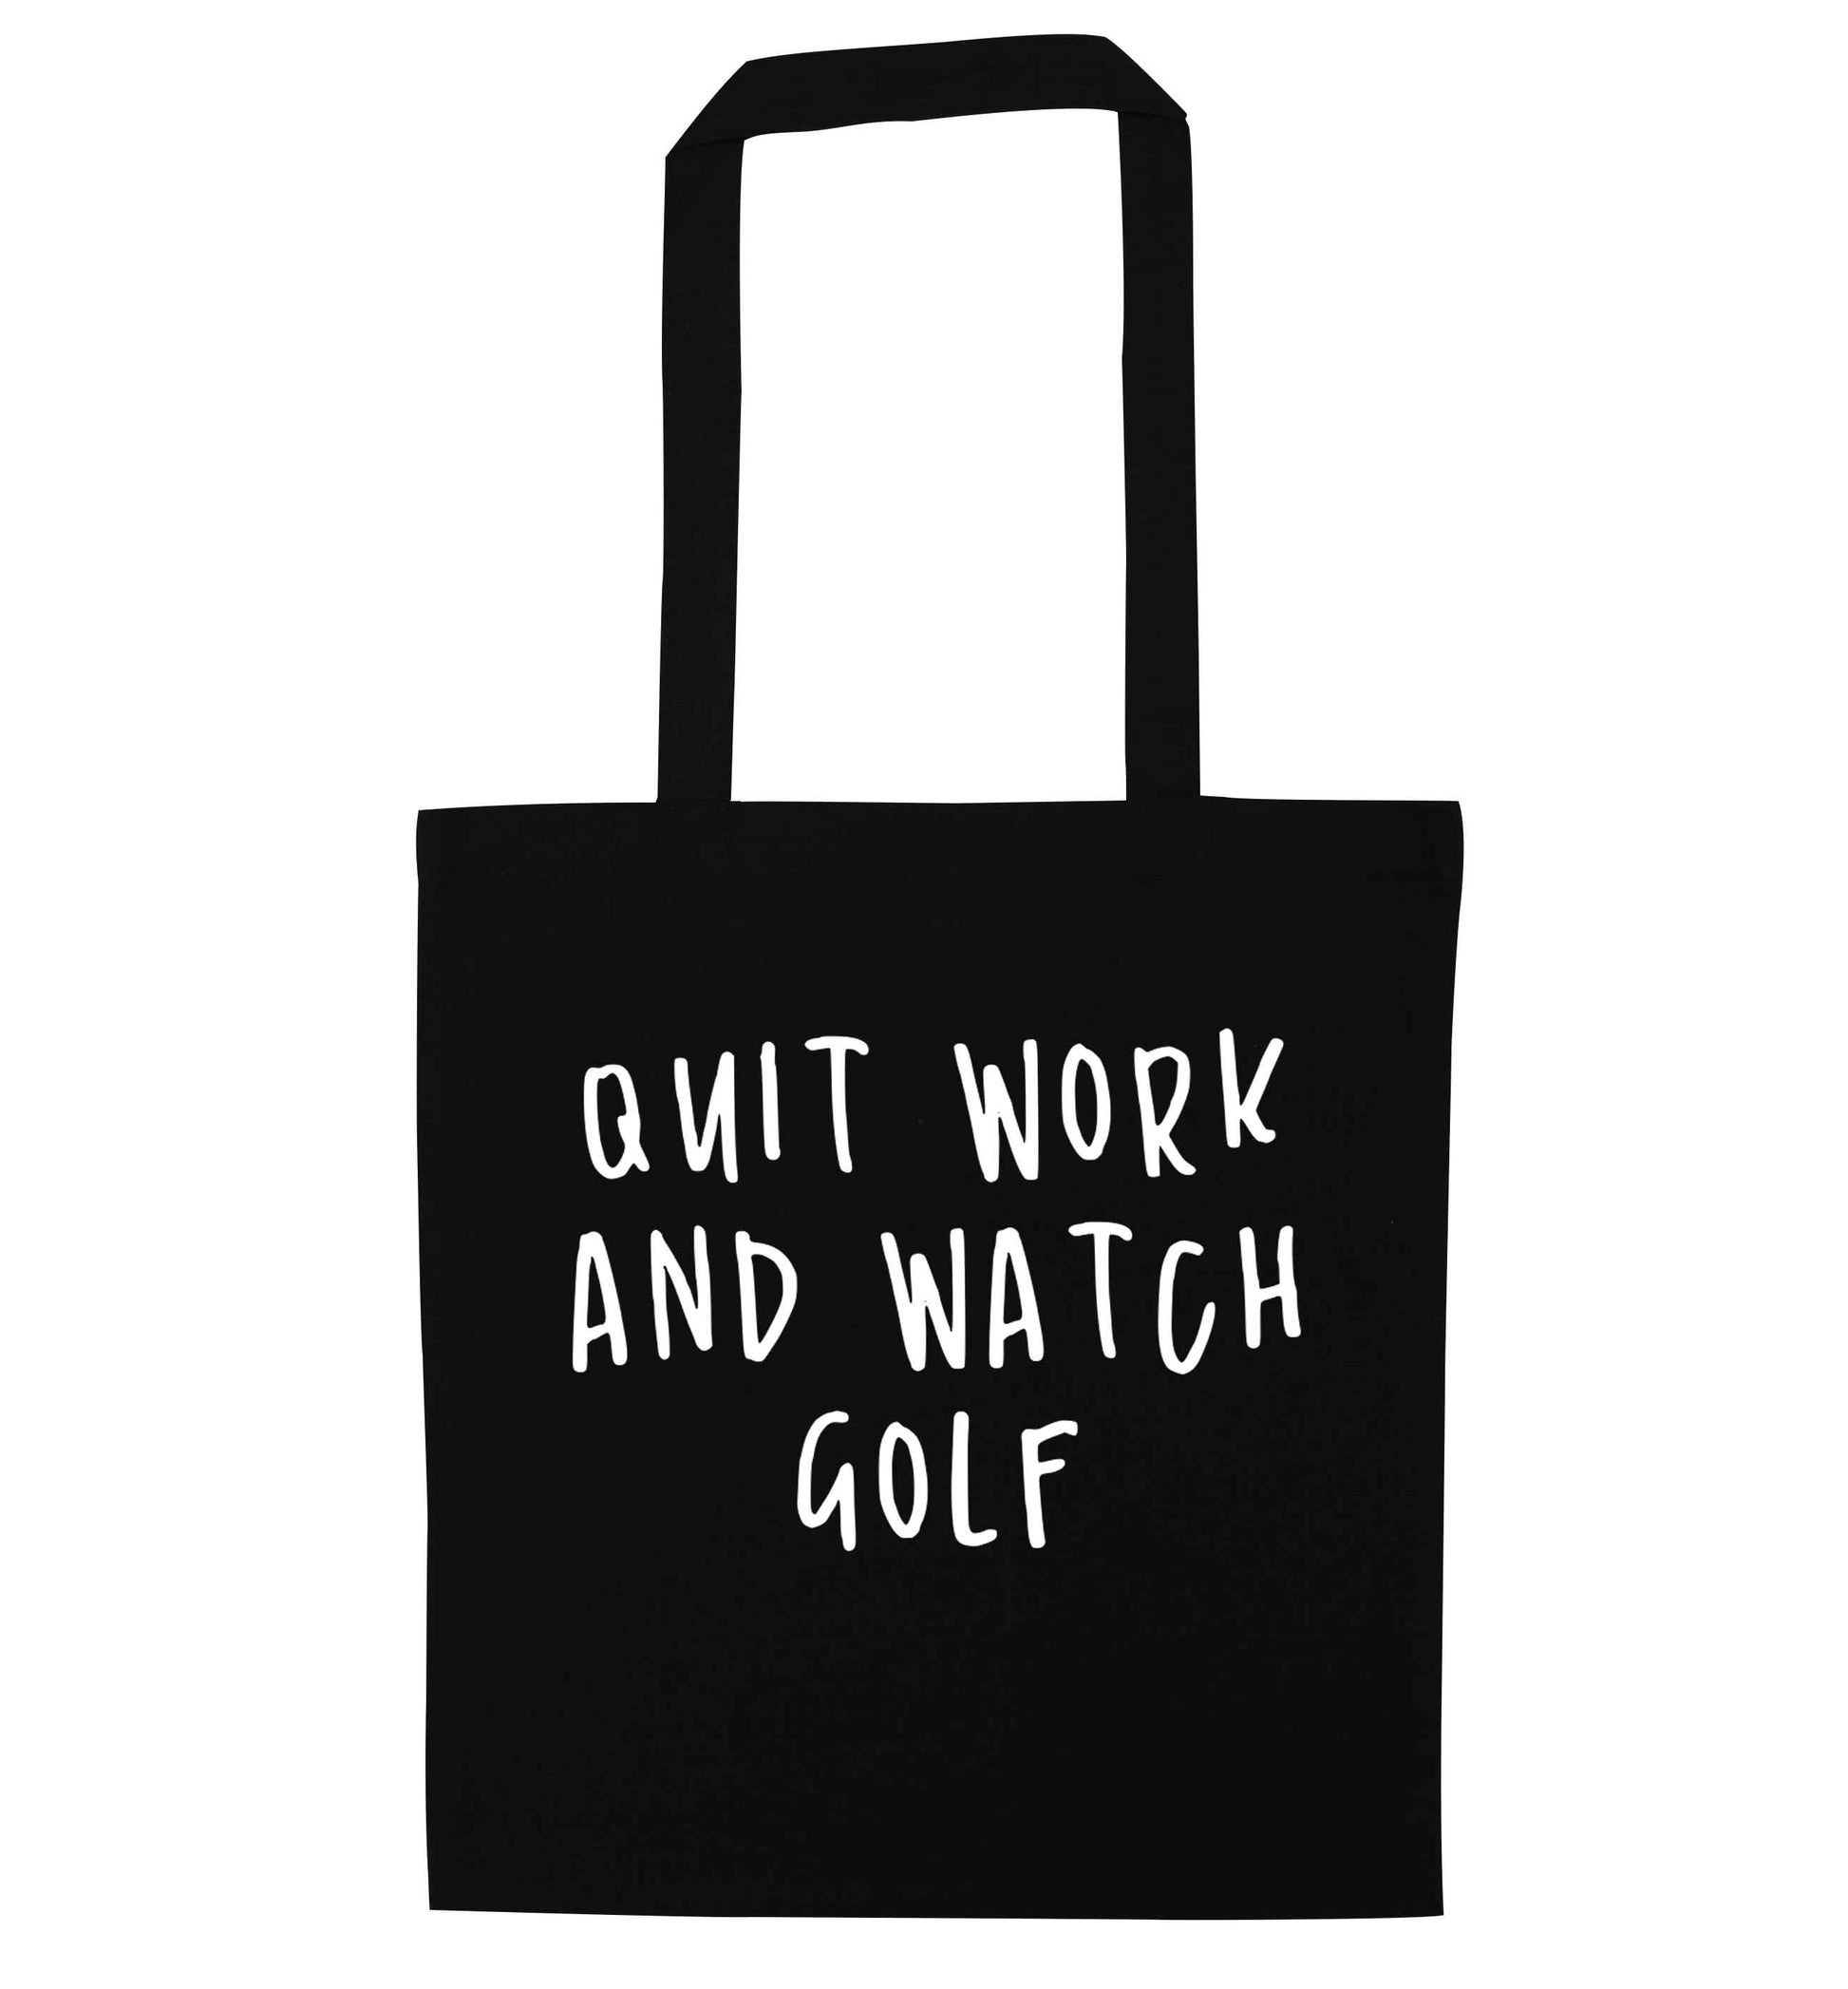 Quit work and watch golf black tote bag